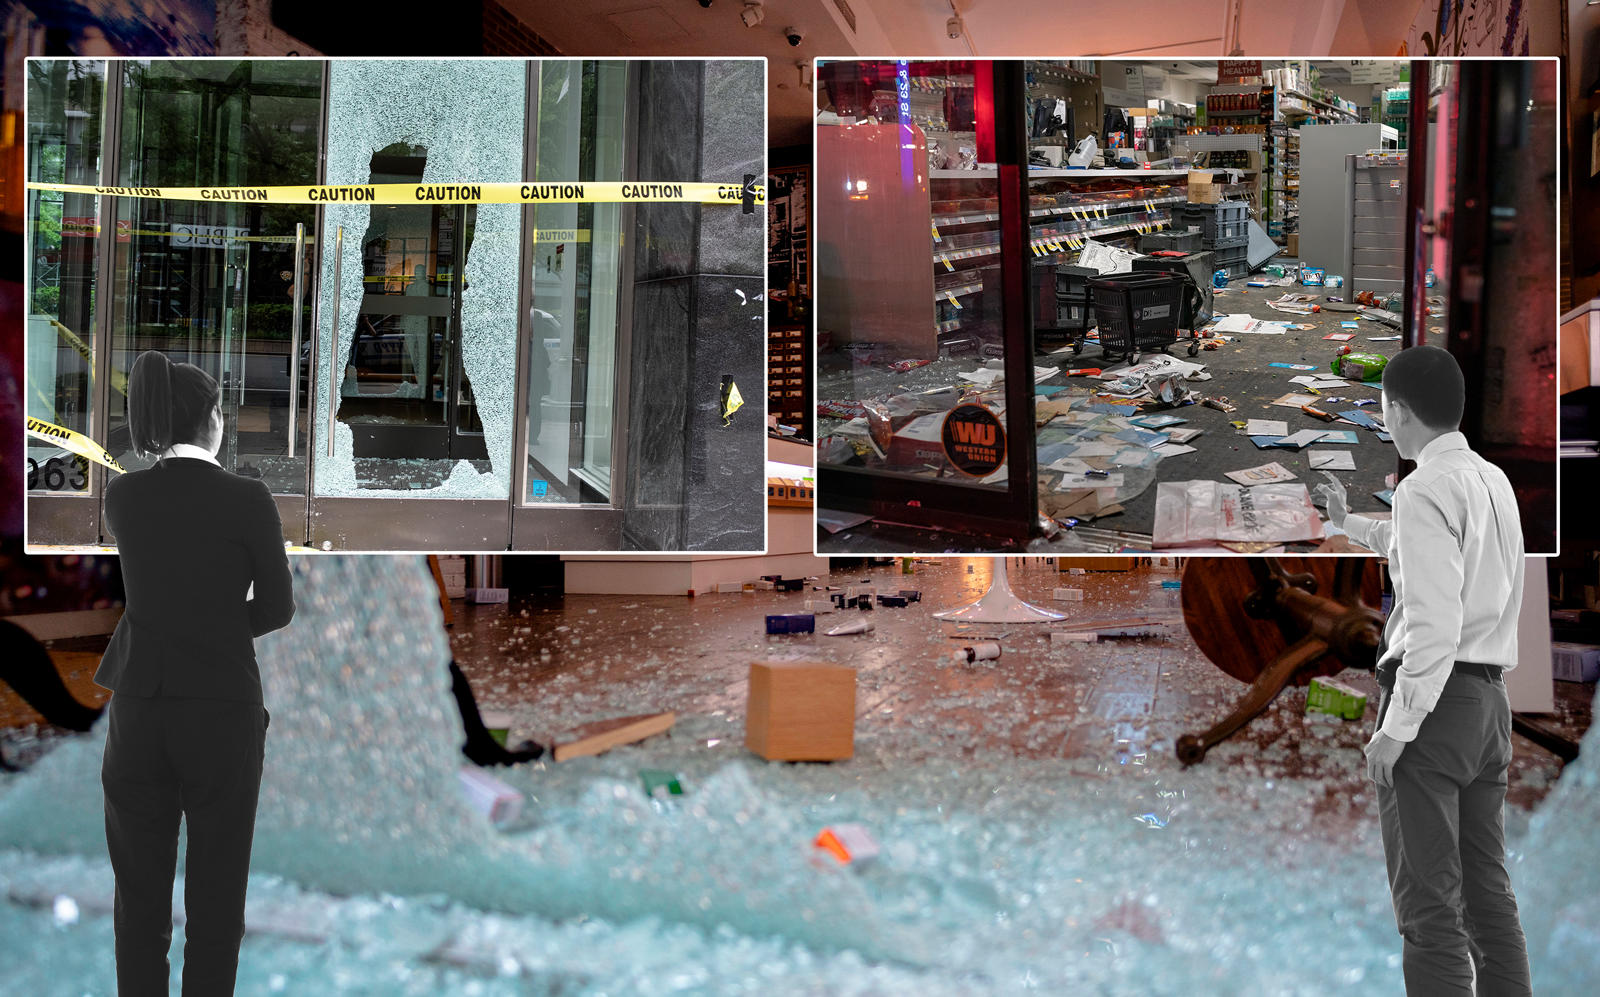 The looting and vandalism continues today, without repercussions